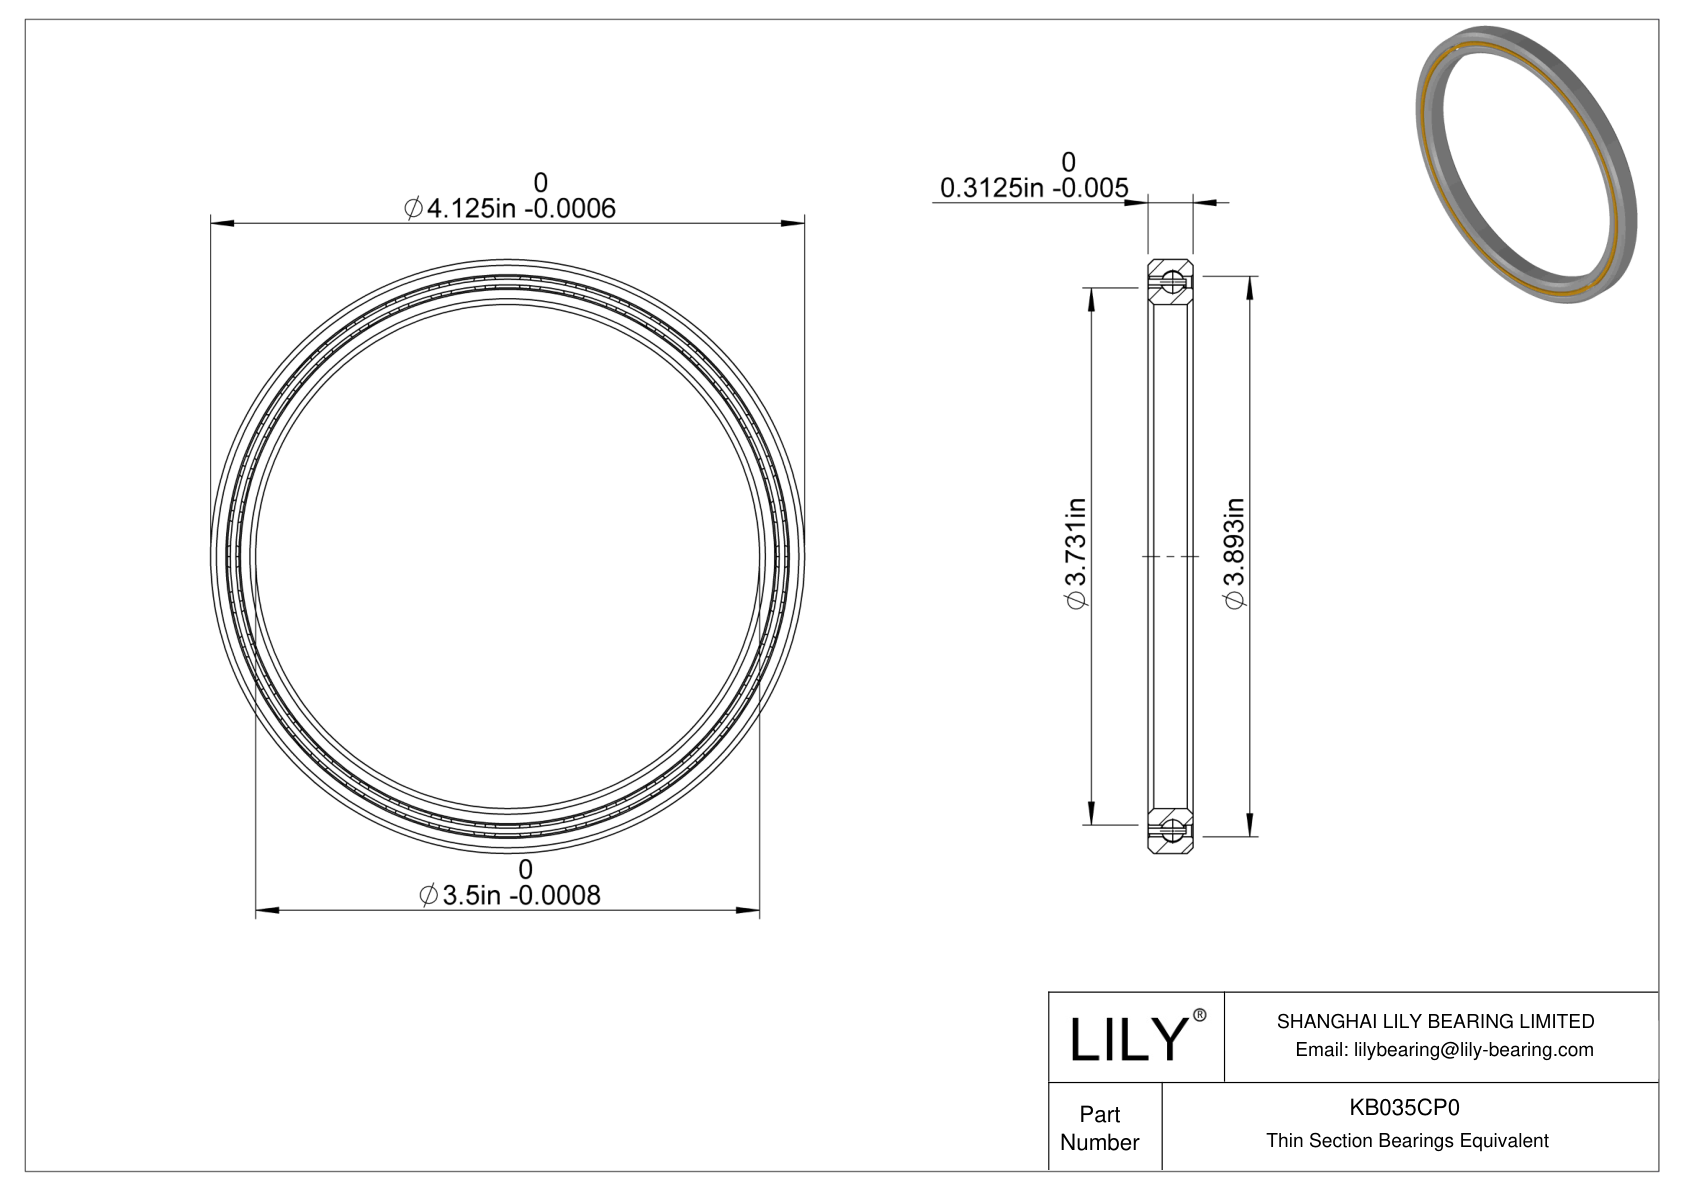 KB035CP0 Constant Section (CS) Bearings cad drawing